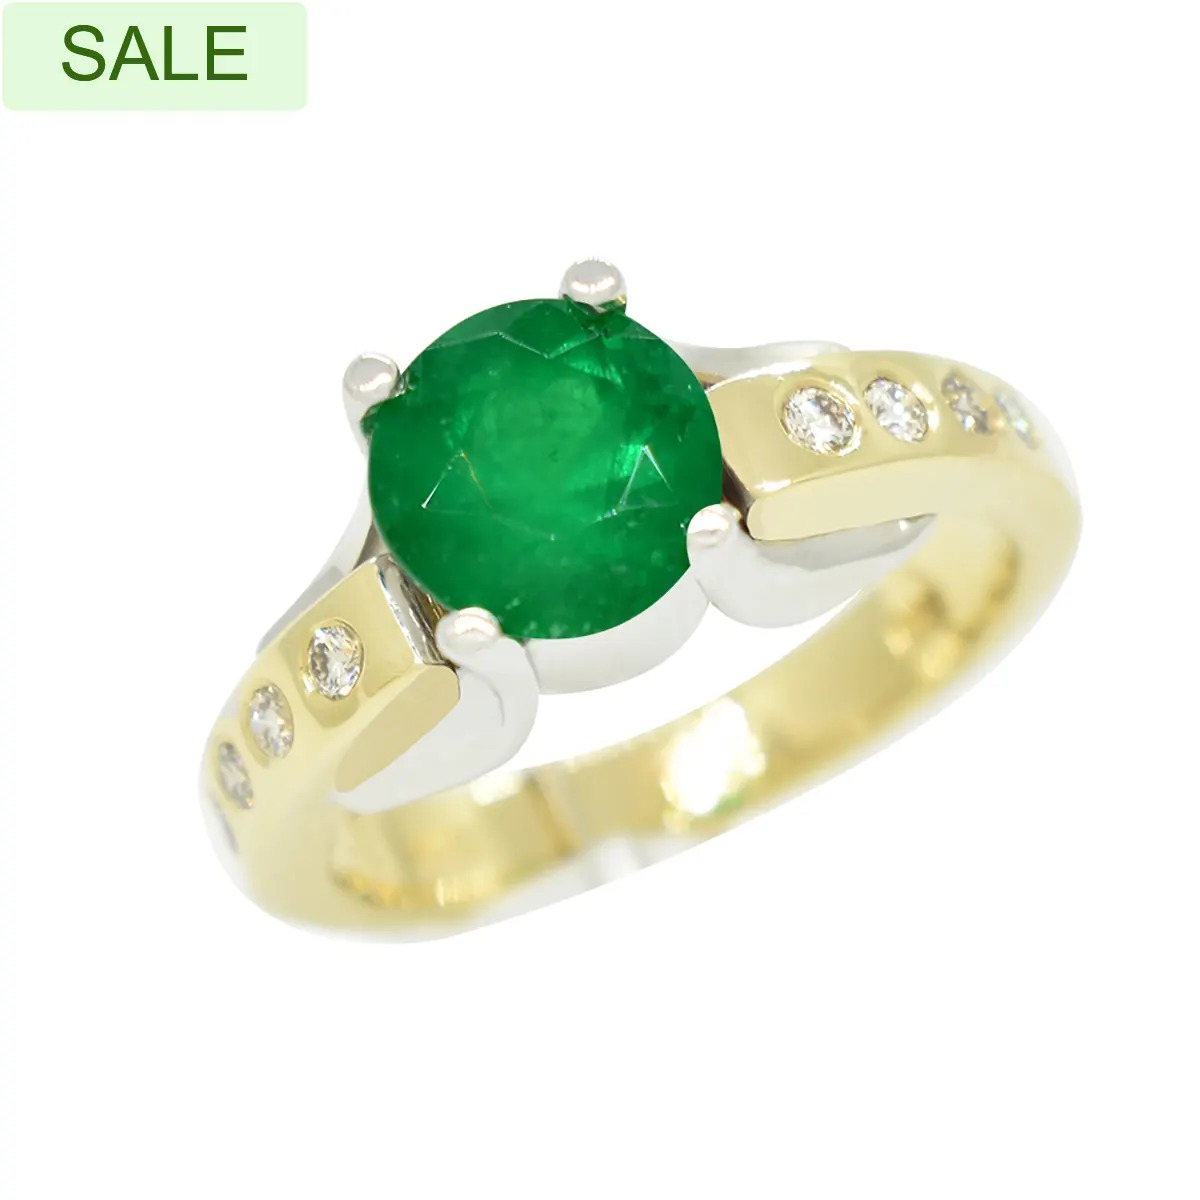 Emerald Ring in 14K Gold Two Tone Ring and Diamond Accents